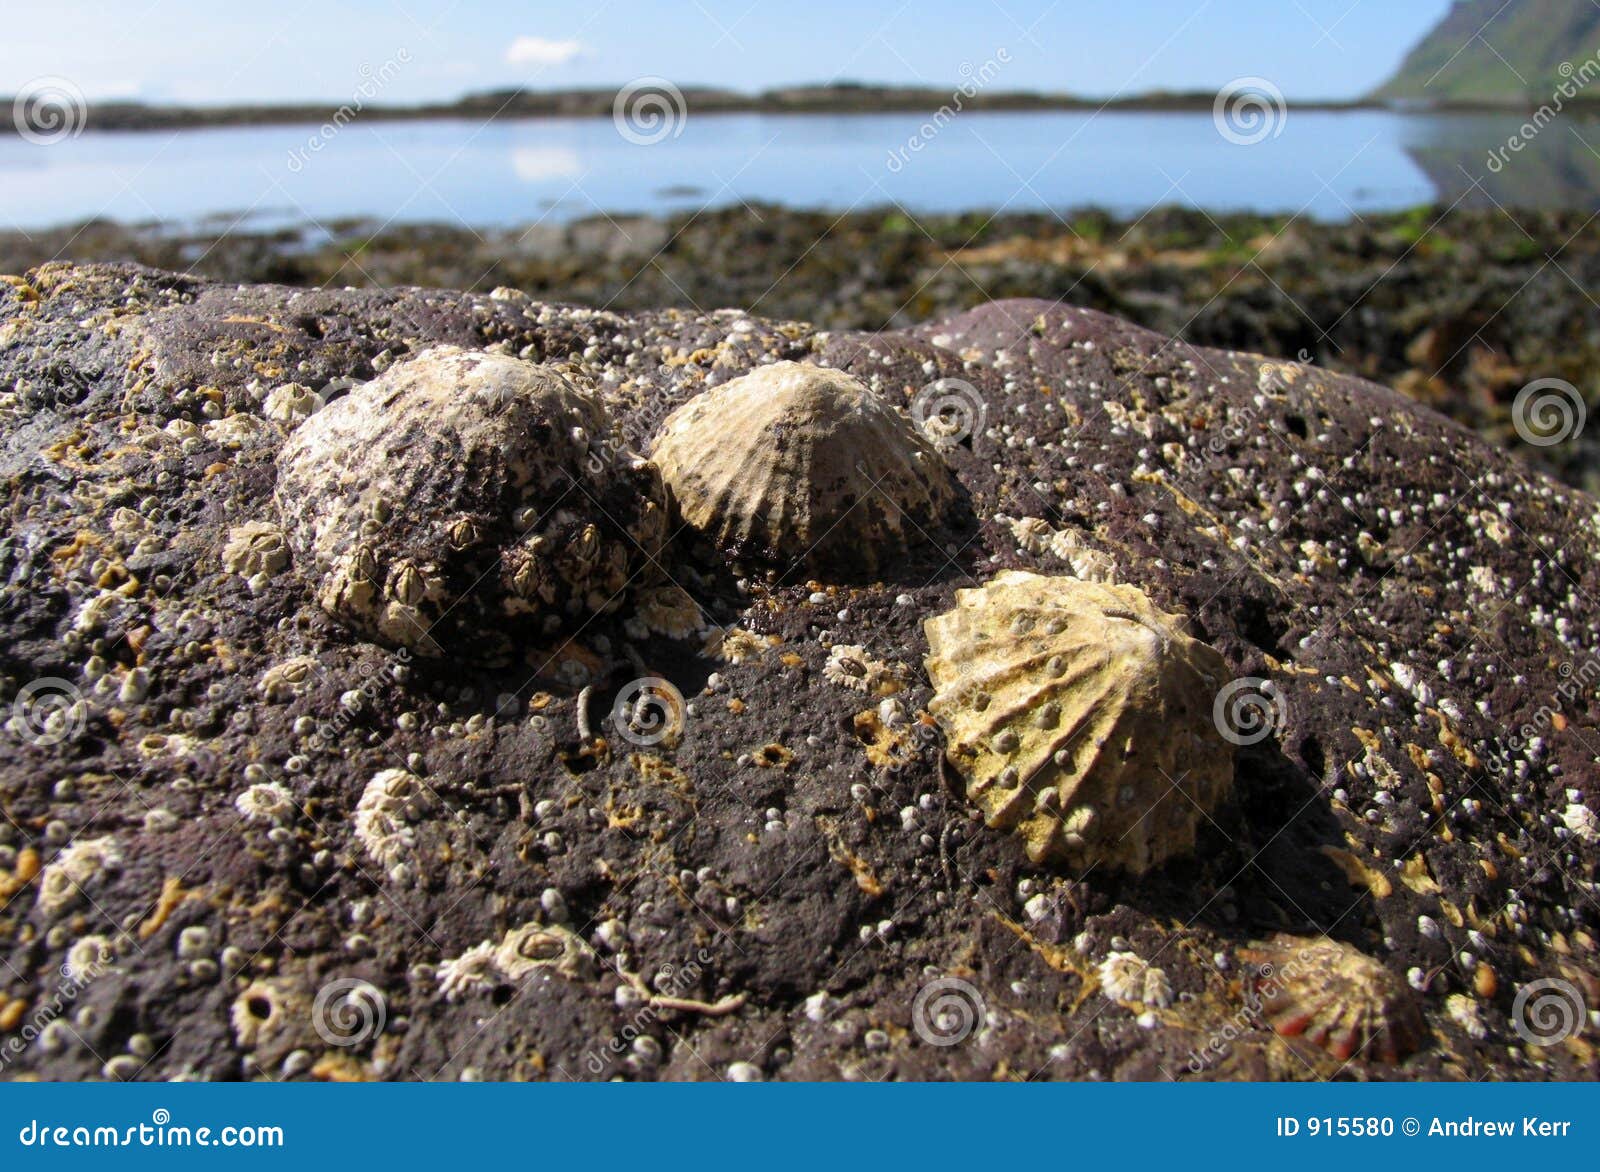 limpets on a rock